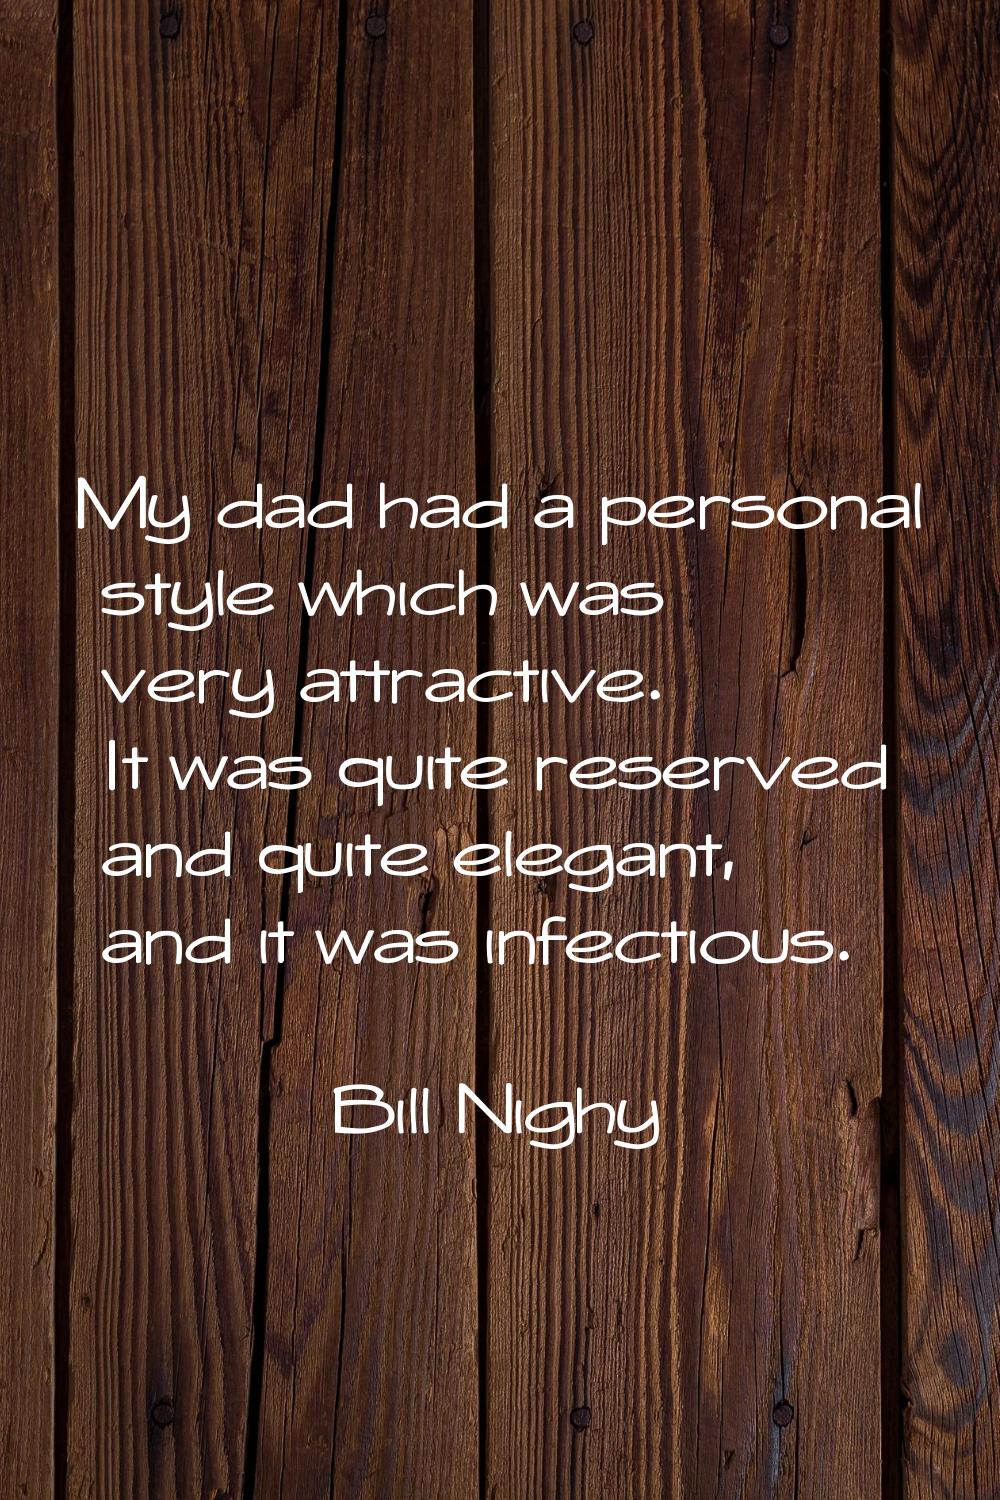 My dad had a personal style which was very attractive. It was quite reserved and quite elegant, and